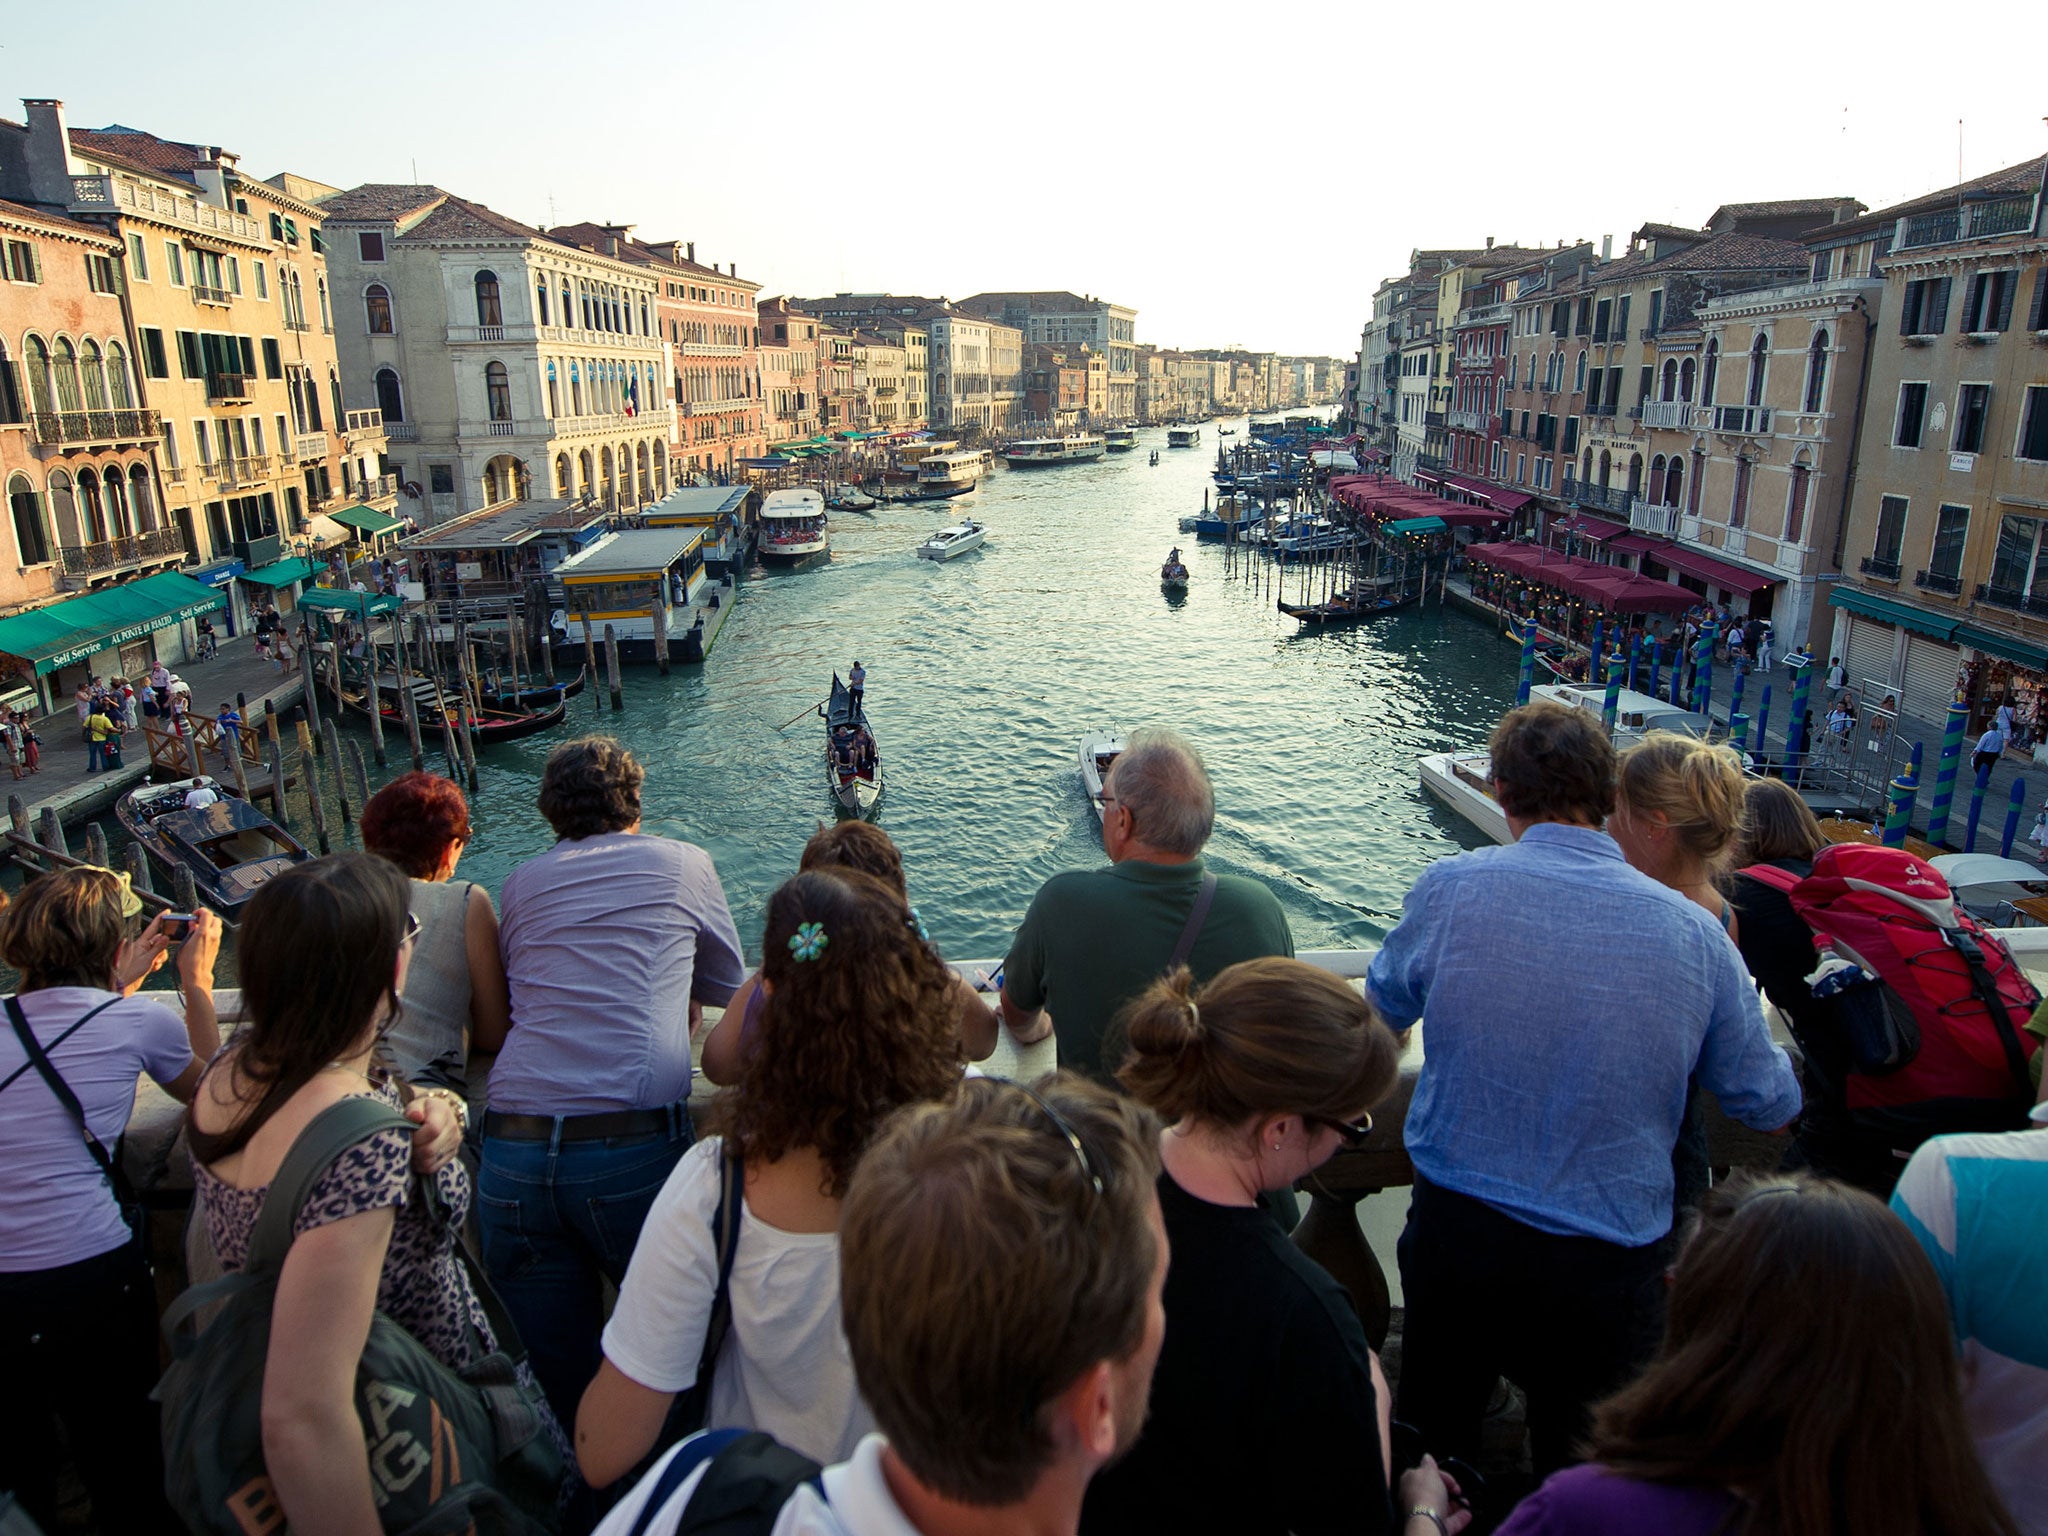 A bridge too far: increasing numbers of day-trippers are crowding Venice’s attractions such as the Rialto Bridge